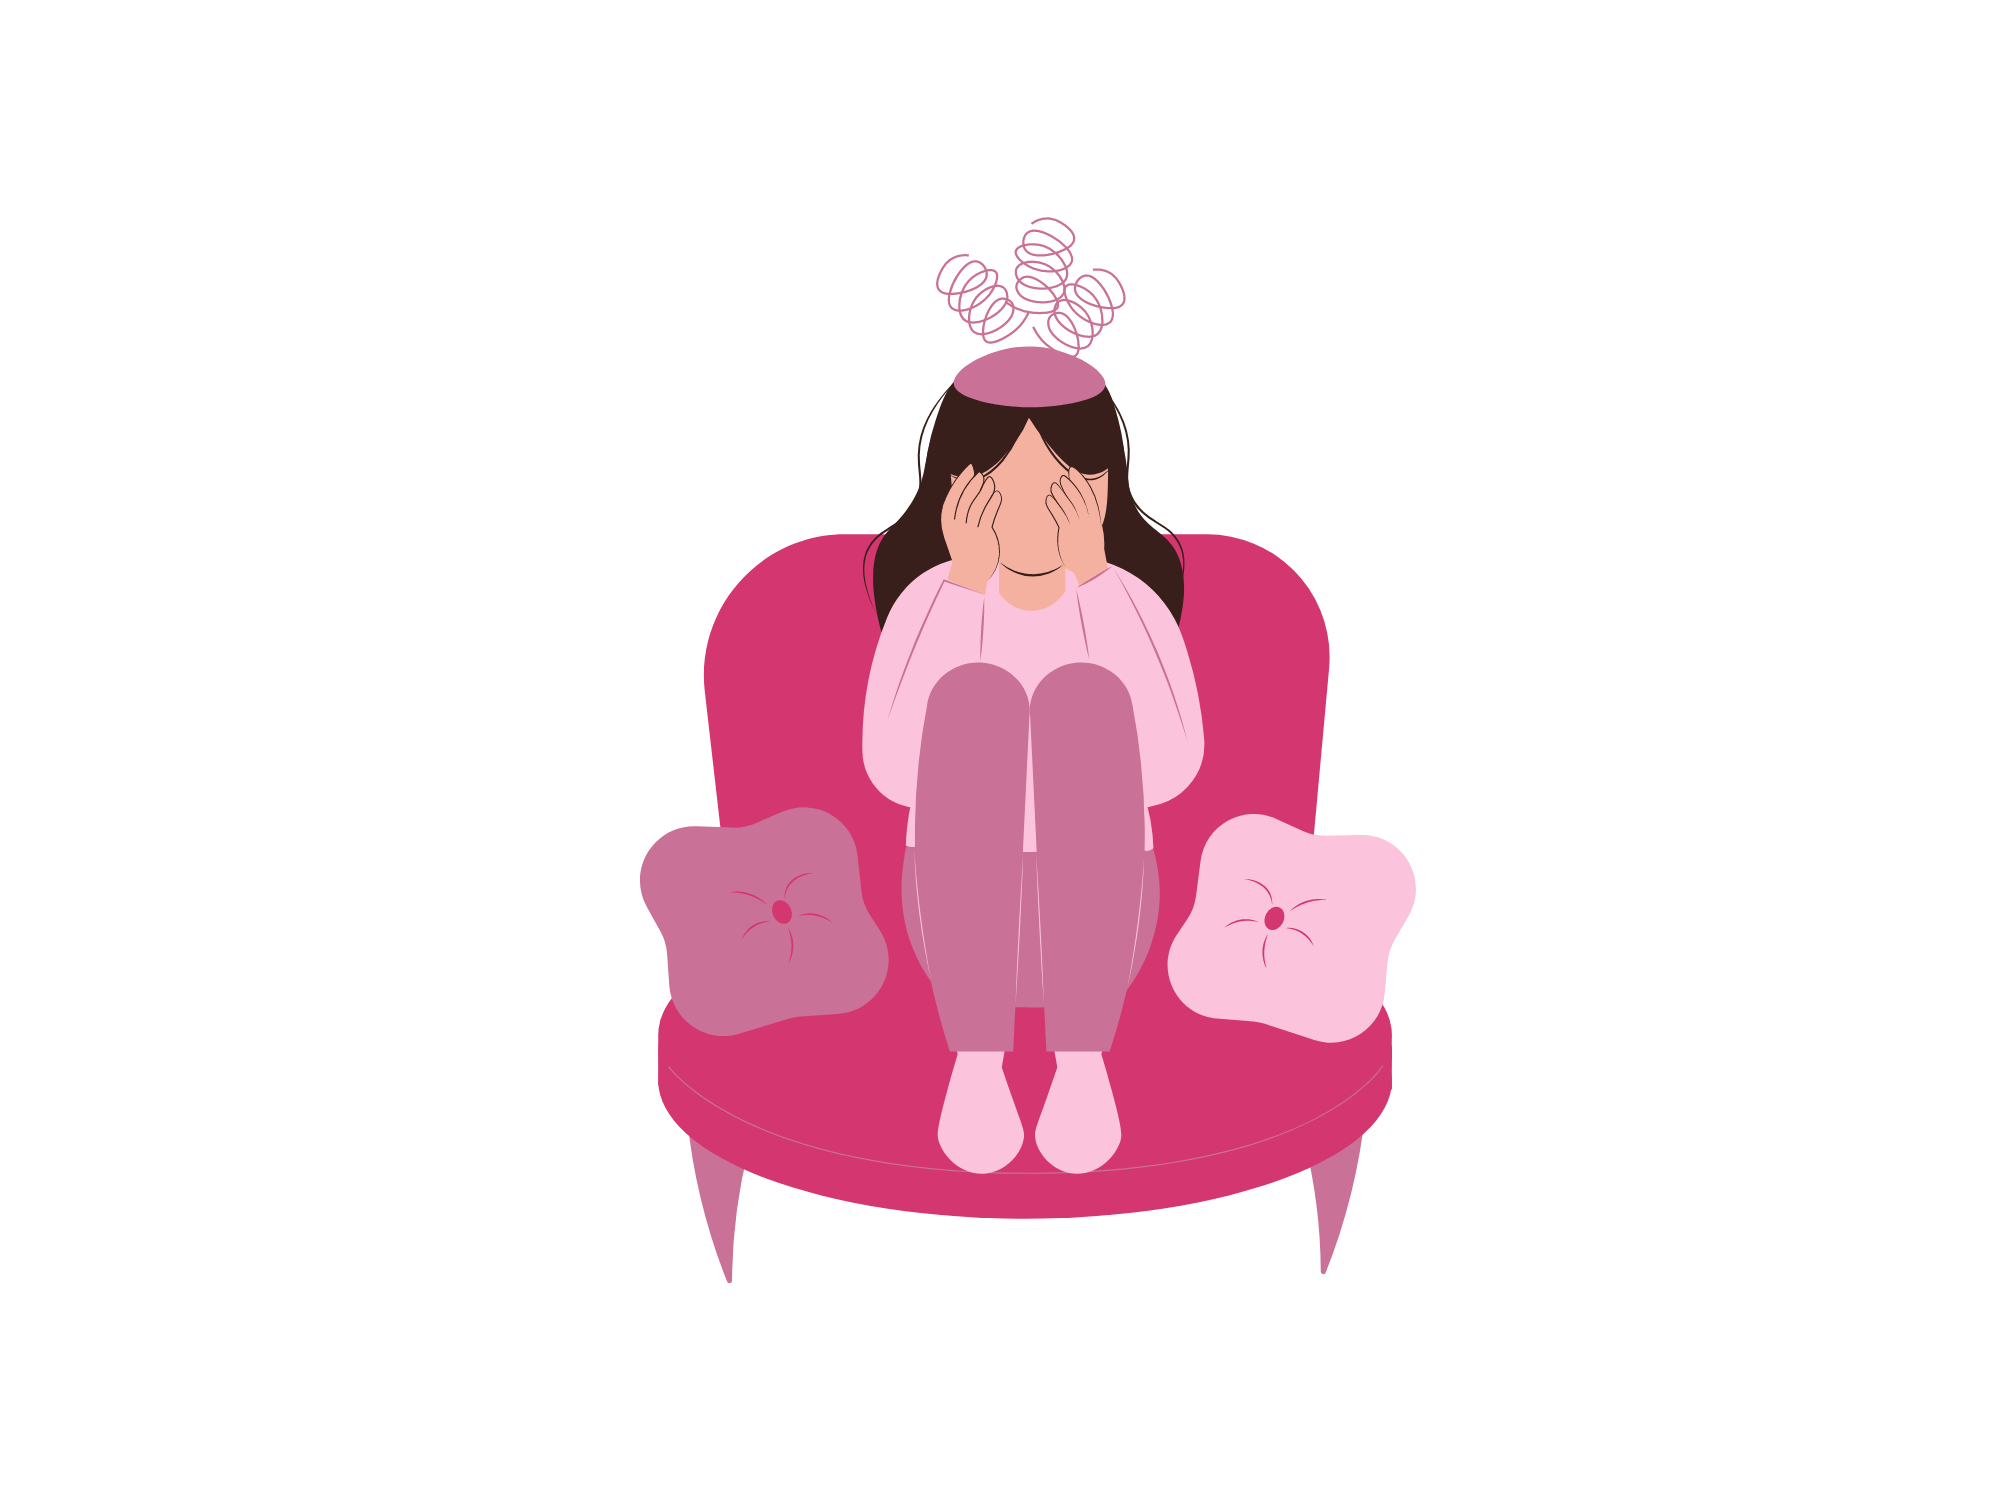 illustration of women sitting in a chair with her head in her hands and springs coming out of her head. Image describes the feeling of anxiety and depression